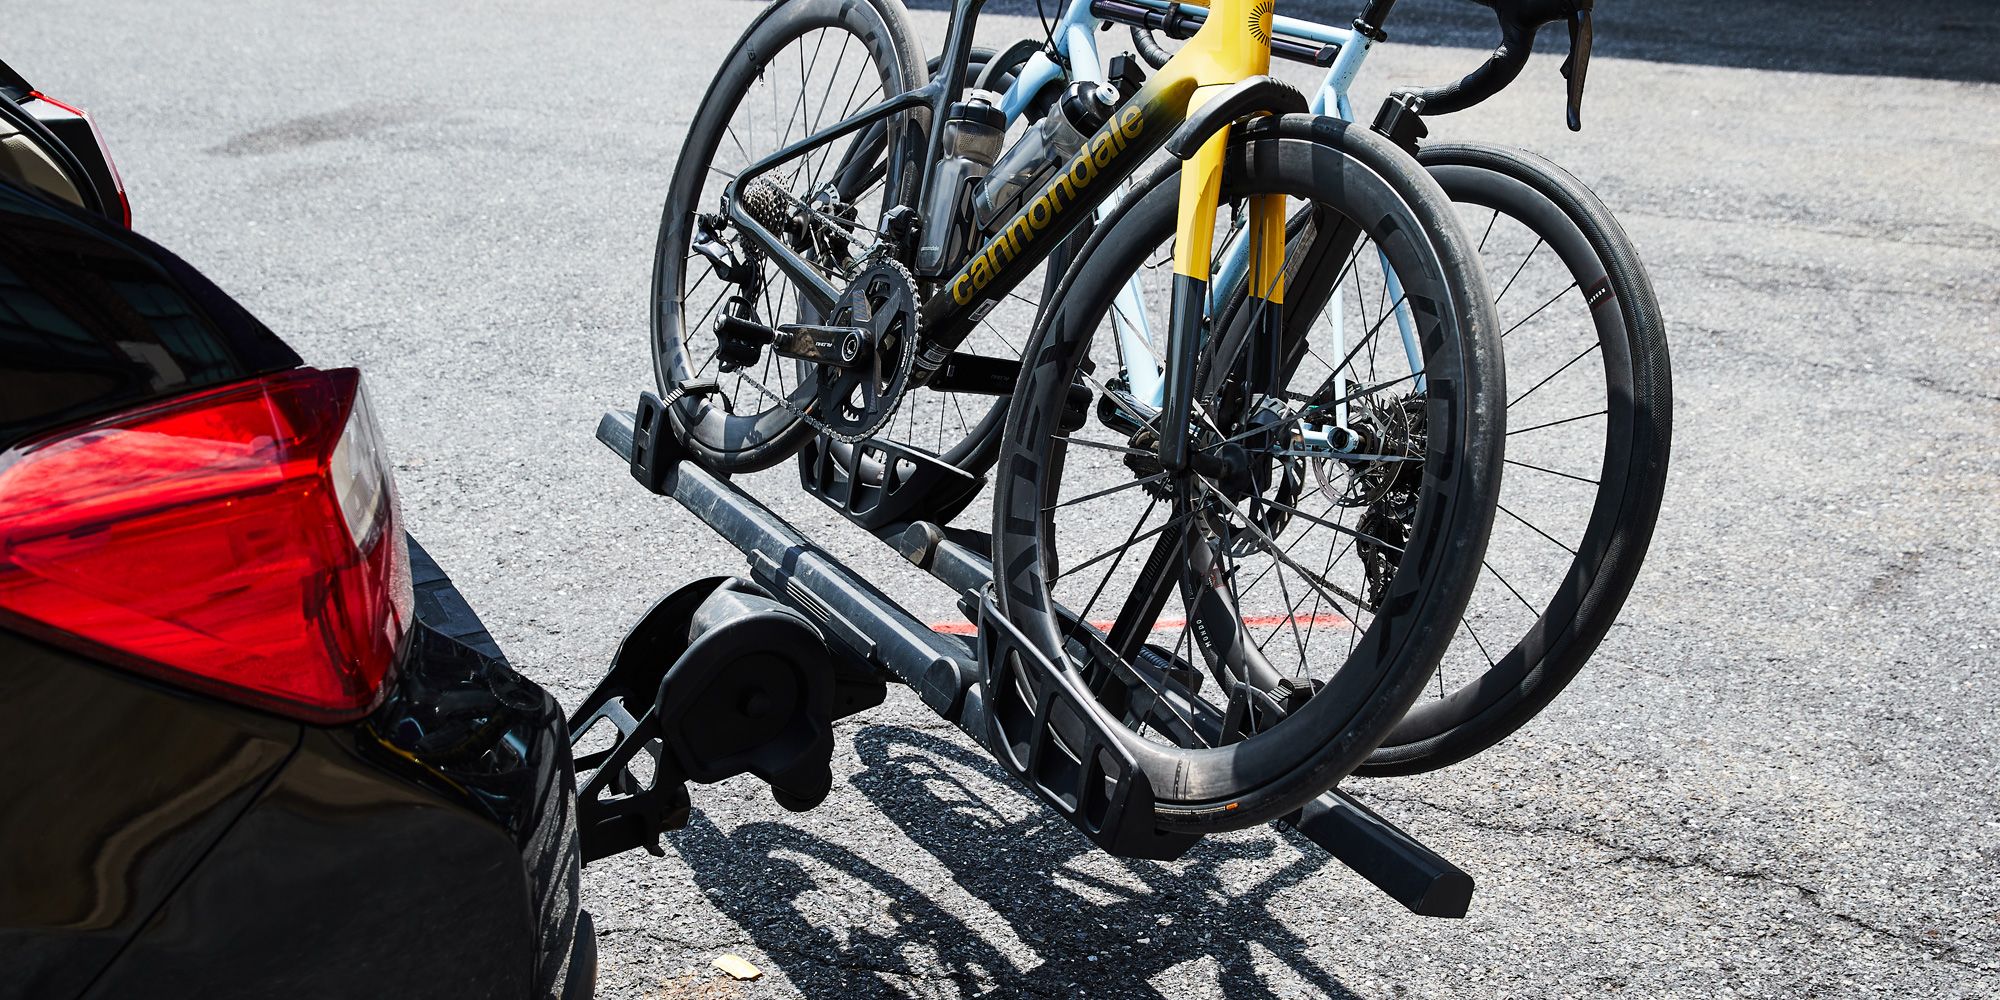 <p>A bike rack is a simple, but important piece of equipment. When you strap your pricey <a href="https://www.google.com/search?client=safari&rls=en&q=best+bikes+pop+mech&ie=UTF-8&oe=UTF-8">bicycle</a> to your even pricier car, SUV, or truck and drive through traffic, potentially at high speed or over bumpy roads, there are many opportunities for things to go horribly wrong.</p><p>And, as it turns out, bike racks are not entirely one size fits all: It pays to do your homework before investing in one, so you can drive with confidence when you bring your bikes on a road trip. Whether you’re looking for a trunk, hitch, or <a href="https://www.popularmechanics.com/adventure/outdoor-gear/g37268734/best-roof-racks/">roof rack</a>, you should pick your bike rack carefully. Luckily, we’ve done the trial and error for you. We can help you figure out what to look for in a bike rack, and have narrowed down the options to 10 excellent picks that should help most riders get their bikes from point A to point B.</p><p class="body-tip"><strong>Bike Trip!</strong> <a href="https://www.popularmechanics.com/adventure/outdoors/g3045/best-bike-helmets/">Best Bike Helmets</a> ● <a href="https://www.popularmechanics.com/adventure/outdoor-gear/g41356552/bike-tool-kit/">Best Bike Tool Kits</a> ● <a href="https://www.popularmechanics.com/adventure/outdoor-gear/g3046/best-bike-lights/">Best Bike Lights</a></p><h2 class="body-h2">Best Bike Racks</h2><ul><li><strong>Best Overall: </strong><a href="https://go.redirectingat.com?id=74968X1553576&url=https%3A%2F%2Fwww.rei.com%2Fproduct%2F190985%2Fthule-t2-pro-xtr-2-bike-hitch-rack%3Fcm_mmc%3Daff_AL-_-40661-_-55097-_-NA%26avad%3D55097_c31b03395&sref=https%3A%2F%2Fwww.popularmechanics.com%2Fadventure%2Foutdoors%2Fg3146%2Fbest-bike-racks%2F">Thule T2 Pro XTR Hitch Rack</a></li><li><strong>Best Value:</strong> <a href="https://www.amazon.com/dp/B07GWCQGLV?tag=syndication-20&ascsubtag=%5Bartid%7C10060.g.3146%5Bsrc%7Cmsn-us">Ikuram R 2 Hitch Bike Rack</a></li><li><strong>Best for Road Bikes:</strong> <a href="https://go.redirectingat.com?id=74968X1553576&url=https%3A%2F%2Fwww.rei.com%2Fproduct%2F871149%2Fyakima-ridgeback-4-bike-hitch-rack%3Fcm_mmc%3Daff_AL-_-40661-_-55097-_-NA%26avad%3D55097_f31af2405&sref=https%3A%2F%2Fwww.popularmechanics.com%2Fadventure%2Foutdoors%2Fg3146%2Fbest-bike-racks%2F">Yakima RidgeBack 4-Bike Hitch Rack</a></li><li><strong>Best for E-bikes:</strong> <a href="https://www.amazon.com/Hollywood-Racks-Destination-Bike-Hitch/dp/B073113CFH?tag=syndication-20&ascsubtag=%5Bartid%7C10060.g.3146%5Bsrc%7Cmsn-us">Hollywood Racks Destination E Hitch Rack</a></li><li><strong>Best for Families:</strong> <a href="https://1up-usa.com/product/equipd-double">1Up Equip-D Double Hitch Rack</a></li></ul><blockquote class="body-blockquote"><strong>The Expert: </strong>I’ve spent decades riding bikes of all varieties over road and trail. That has also led me to carry lots of bikes atop many kinds of vehicles. I’ve used bike racks of every format with vehicles of every arrangement—cars, trucks, SUVs, vans, and even RVs—and have experienced a wide spectrum of the best and worst products. I have applied this experience to review bikes, bike racks, and a range of other cycling gear for <em>Bicycling</em>, <em>Popular Mechanics</em>, <em>Popular Science, the Manual</em>, and more.</blockquote><h2 class="body-h2">What to Consider When Buying a Bike Rack</h2><h3 class="body-h3">Compatibility</h3><p>The first thing you need to check when looking at a bike rack is whether it will properly support your bike and install correctly on your vehicle. Different racks are designed for different vehicle types, so a trunk rack made for SUVs may not fit right on a sedan. Some racks offer cross-compatibility, but it’s always worth it to check. Most bike racks will clearly indicate whether they’re designed to fit on specific types of vehicles, such as SUVs, pickups, sedans, or hatchbacks. They may occasionally specify make and model as well.</p><p>Figuring out whether the rack can handle your bike may be a bit trickier. Some racks are too narrow for fat tires. Others can’t fit road bikes or step-throughs. <a href="https://www.popularmechanics.com/adventure/outdoors/g19747012/best-electric-bikes/">E-bikes</a> make things even more complicated, given their extra weight and the wide range of accessories that can be easily destroyed in transit. (In general, baskets, fenders and other items protruding over the front wheel are all but impossible to load onto certain racks without risking damage.) </p><p>Make sure to read a rack’s description and specifications carefully before buying one, so you can make sure to buy one that supports your bike. I’ve pointed out certain notable limitations in our top picks, but it never hurts to double-check for yourself.</p><h3 class="body-h3">Types of Bike Racks</h3><p>Bike racks come in a few different shapes and sizes. Beyond their compatibility with different types of cars, each design comes with certain benefits and drawbacks. Some are easier to load, while others may naturally be able to handle more weight, for example. Here are a few things to keep in mind when picking what to put on your vehicle.</p><p><strong>Hitch racks</strong>, which attach by inserting directly into your vehicle hitch receiver, are easy to install and access. Unlike a roof rack, you don’t need to lift your bikes overhead. Typically compatible with 1¼-inch and 2-inch hitch receivers, they frequently feature integrated locks with cables to secure your bike to the rack. Many are also hinged so they can fold up and out of the way when not in use or tilt bikes out of the way to provide trunk access.</p><p>If you've sworn off hitch racks because of an older model, we understand but it’s worth pointing out that modern designs have dramatically reduced the amount of rattling and unwanted vibration.</p><p><strong>Roof racks</strong> typically feature a full system that bolts onto your vehicle’s factory-installed roof rails and cross bars via a set of individual fixture points. If you don’t have a roof rack (and don’t want one), some models will attach to your ride using suction cups that vacuum-seal to a flat roof. Roof racks tend to be the best option if you don’t have a trailer hitch.</p><p>Some roof racks require you to remove your front wheel, which reduces how high the bike sits on your car. If you go this route, make sure to check that the rack is compatible with your bike’s fork, particularly if it has a thru-axle. Given all that, we recommend staying away from a roof rack if you have an especially tall or heavy bike.</p><p>Also, make sure to get at least a rough estimate of the height of your vehicle with your bikes on it, so you know whether you can enter tunnels, pass under bridges, or enter parking garages without issue.</p><p><strong>Trunk racks </strong>tend to be the most affordable type of bike rack. They attach to the back of your vehicle via straps and hooks, which is great if you want something removable. On the other hand, they leave the back of your car susceptible to dings and scratches, as they mount the bikes closer to your trunk. The mounting points can also create wear marks on your vehicle.</p><p>Trunk racks usually hold bikes beneath their top tubes, so they won’t work with step-throughs and some other designs. E-bikes are typically too heavy for trunk racks. They’re also not as secure as other racks, since they aren’t fixed in place as securely.</p><p><strong>Tailgate Pads </strong>specialty racks for pickup trucks, where the bike hangs over the back of the tailgate. With a tailgate pad you can carry as many as seven bikes, depending on the size of your cargo bed, making them a great choice for families and large groups. Most pads use a Velcro and cradle system that anchors the bikes to the bed and keeps the forks from moving and causing damage, while the grooves in your truck bed hold the rear tires in place.</p><p>Tailgate pads aren’t especially theft-proof on their own, but you can use a <a href="https://www.bicycling.com/bikes-gear/a20017112/best-bike-locks/?gclid=Cj0KCQjwnrmlBhDHARIsADJ5b_mrmuiMsws6aZTuLqB76nkZ42TvZCydWr_JX-qzEDLjK03Iod9Ly-IaAiCTEALw_wcB">long cable lock</a> to secure your bikes to an anchor point. They’re a convenient and removable option, but keep in mind that the bikes will be sitting in the bed, which can make it difficult to load additional cargo.</p><h3 class="body-h3">Weight Limit</h3><p>Weight isn’t a looming consideration for conventional road bikes, but you may want to check the weight limit of your bike rack if you plan to move multiple mountain bikes, or bikes with lots of accessories attached.</p><p>E-bikes, on the other hand, are heavy, and many racks simply aren’t strong enough to hold them. A number of companies have begun producing specialty racks for heavy e-bikes, which may be helpful. In any case, though, you should check the weight of a bike rack before you buy it to make sure it can handle the load you plan to put on it.</p><h3 class="body-h3">Security</h3><p>Many bike racks come with security features to ensure that your bikes stay put when you’re parked, including integrated locking cables or locking tire/fork attachments. Depending on how and where you intend to use it, this might not be much of an issue for you. But if security is a concern, look for a rack that locks.</p><h3 class="body-h3">Special Features</h3><p>We never say no to an extra quality-of-life feature or two. Some racks—especially newer models designed for heavy e-bikes—come equipped with ramps for easy loading. Some high-end hitch racks can be dropped at an angle to provide access to the trunk or tailgate. Keep an eye out for features that are relevant to your needs.</p><h2 class="body-h2">How We Selected The Best Bike Racks</h2><p>To select the best bike racks, I drew from many years of firsthand experience testing bike racks from a wide variety of brands and formats. I’ve tried racks that rattled badly and fell off entirely, and I’ve tested others, like the <a href="https://go.redirectingat.com?id=74968X1553576&url=https%3A%2F%2Fwww.rei.com%2Fproduct%2F190985%2Fthule-t2-pro-xtr-2-bike-hitch-rack&sref=https%3A%2F%2Fwww.popularmechanics.com%2Fadventure%2Foutdoors%2Fg3146%2Fbest-bike-racks%2F">Thule T2 Pro XTR</a>, that held up solidly through thousands of miles of driving, frequently over rough, bumpy roads.</p><p>This list also leans heavily on the experts at <em>Bicycling</em>, who have spent years using and <a href="https://www.bicycling.com/bikes-gear/a25437985/best-bike-racks/">testing bike racks</a> from a variety of manufacturers. Our selections represent a wide range of vehicle and bike compatibilities, styles, and budgets. In the most recent update, I took into account the latest product releases as well as the rising popularity of ebikes, which skewed some selections toward heavier weight capacities. Here are 10 of the best bike racks on the market right now.</p>